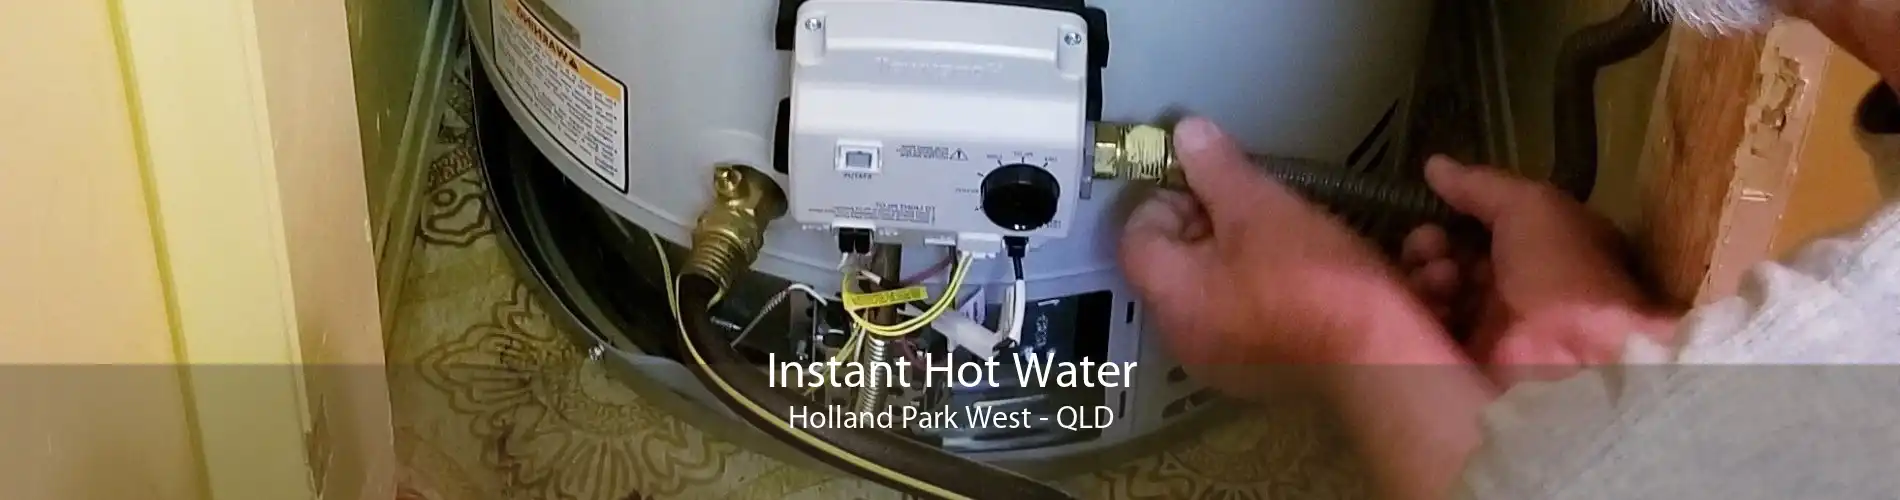 Instant Hot Water Holland Park West - QLD